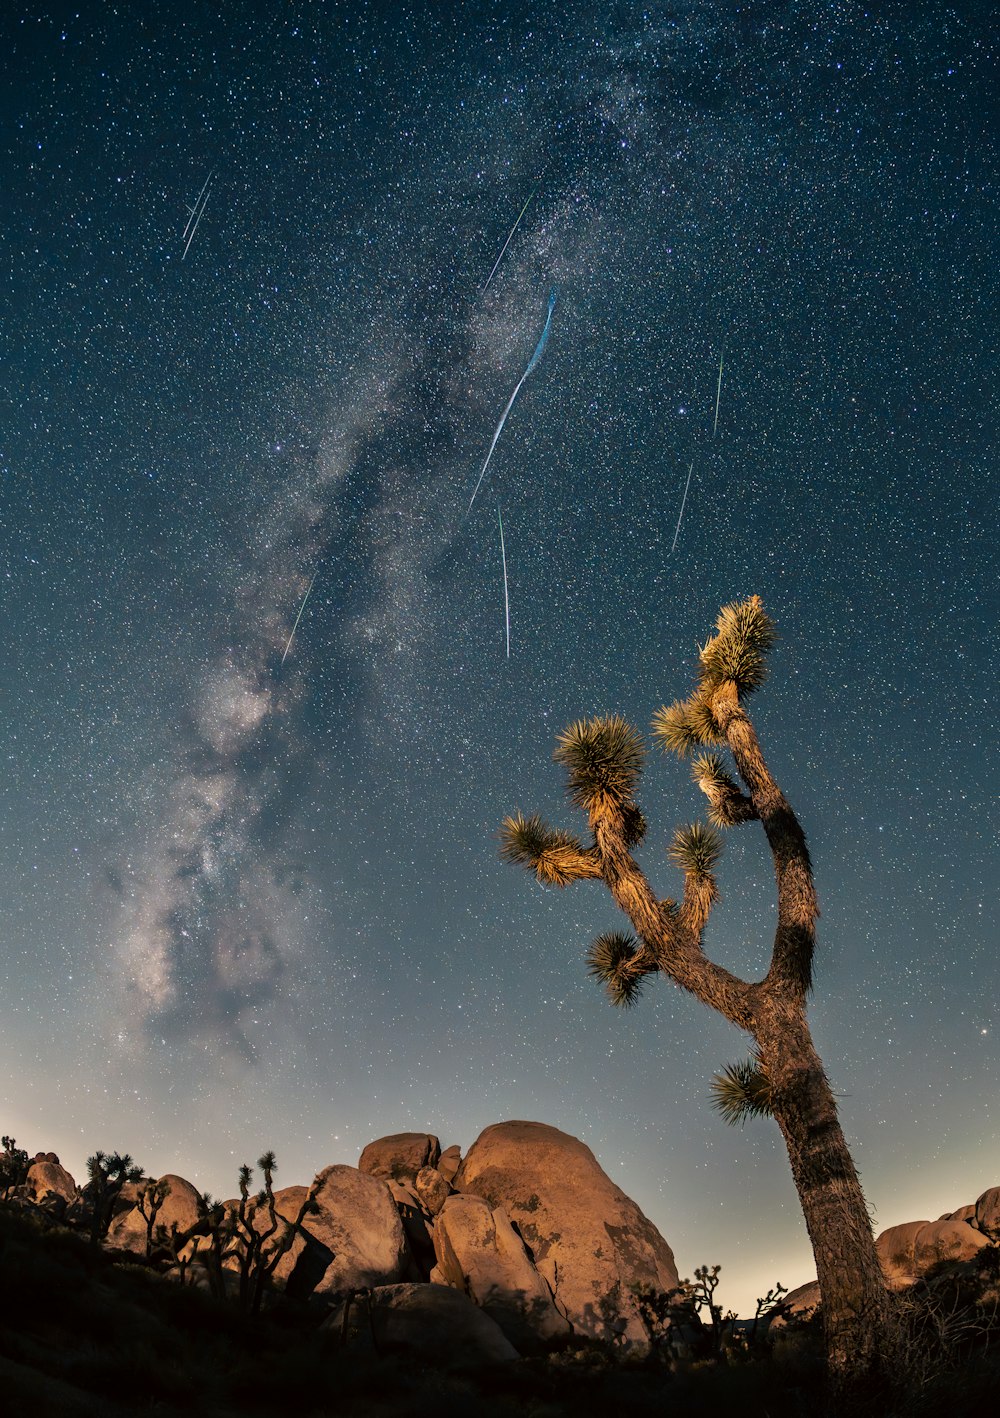 a night sky with a shooting star and a joshua tree